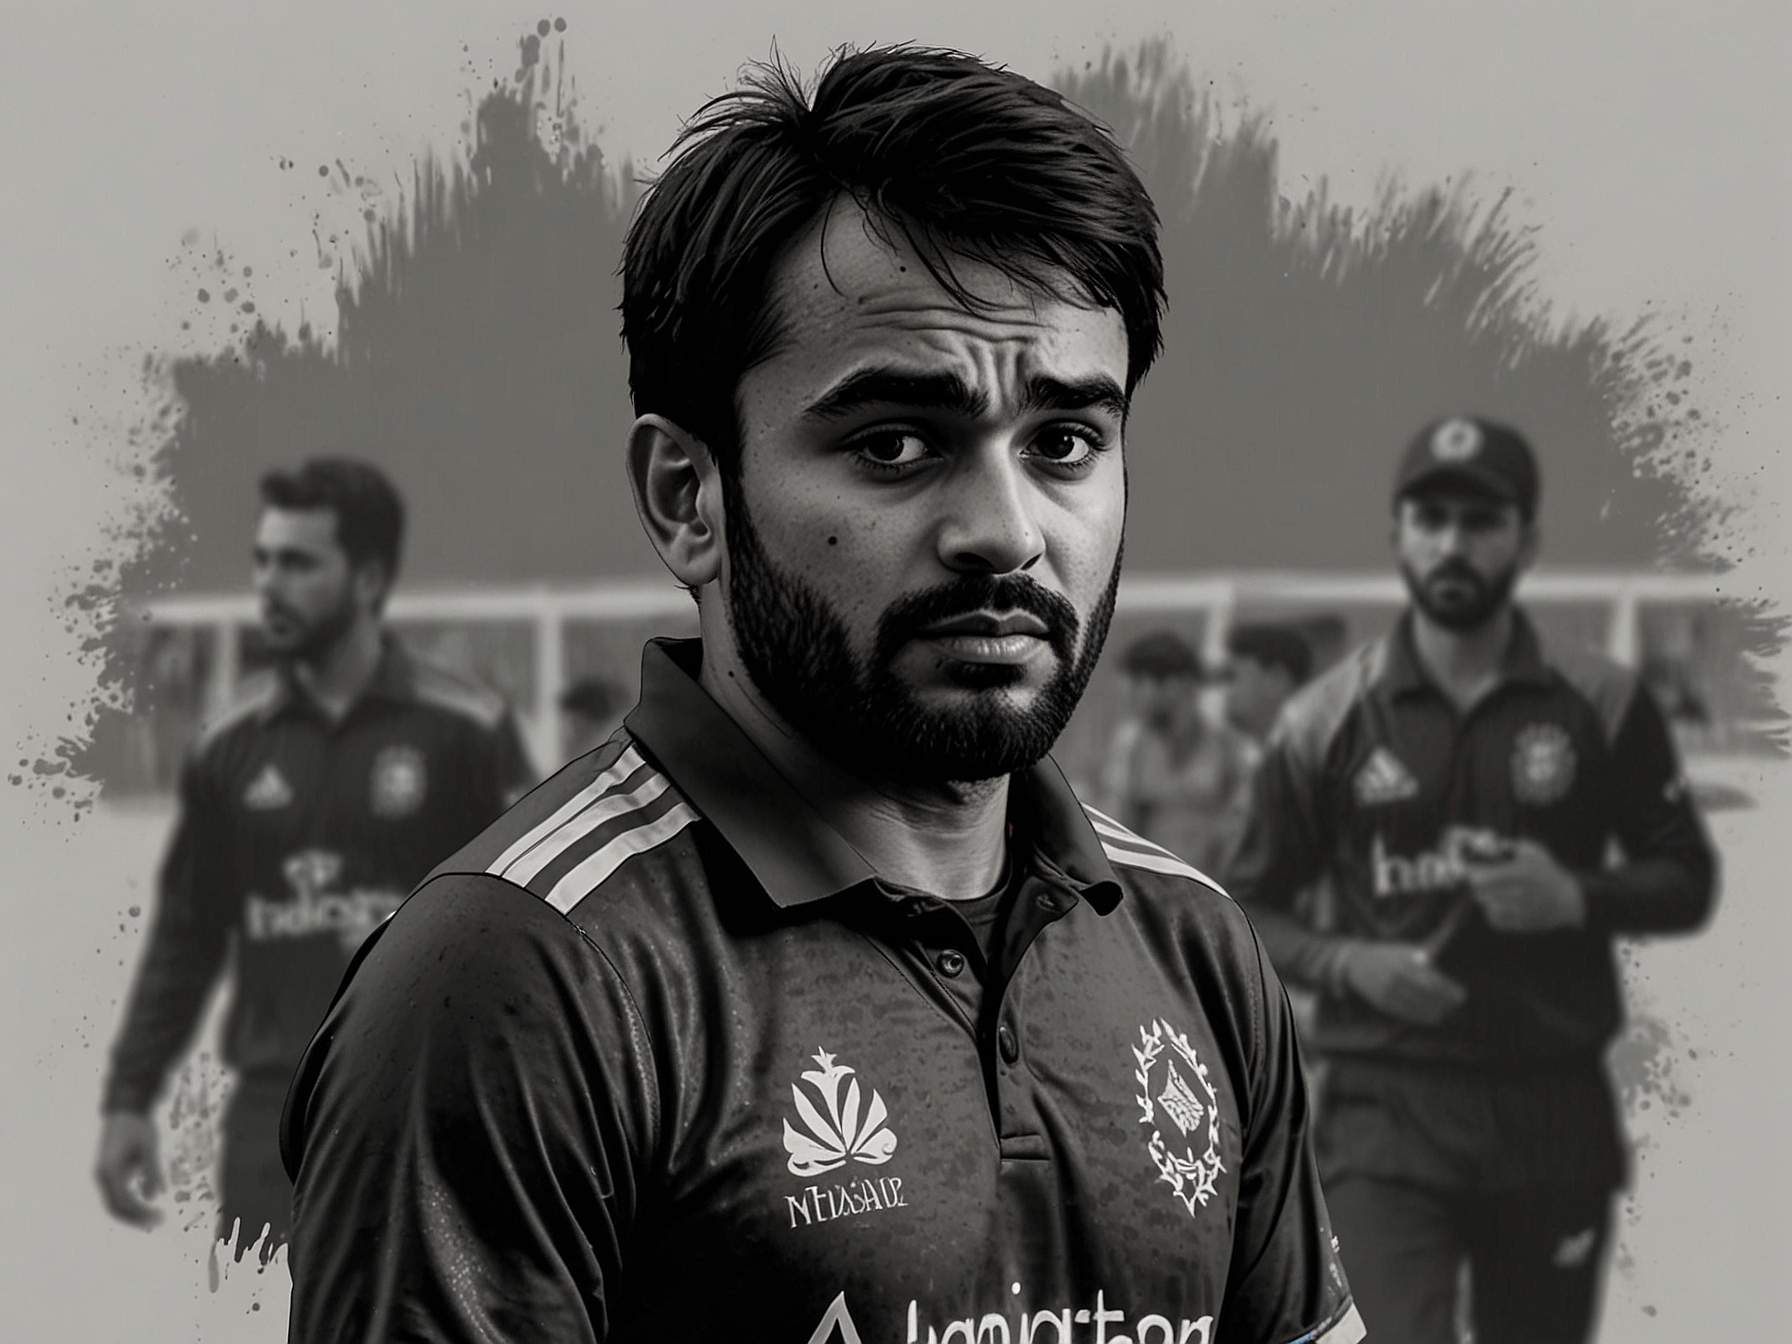 Rashid Khan speaks at the post-match presentation, reflecting solemnly on Afghanistan's performance. His expressions capture the disappointment over their batting execution.